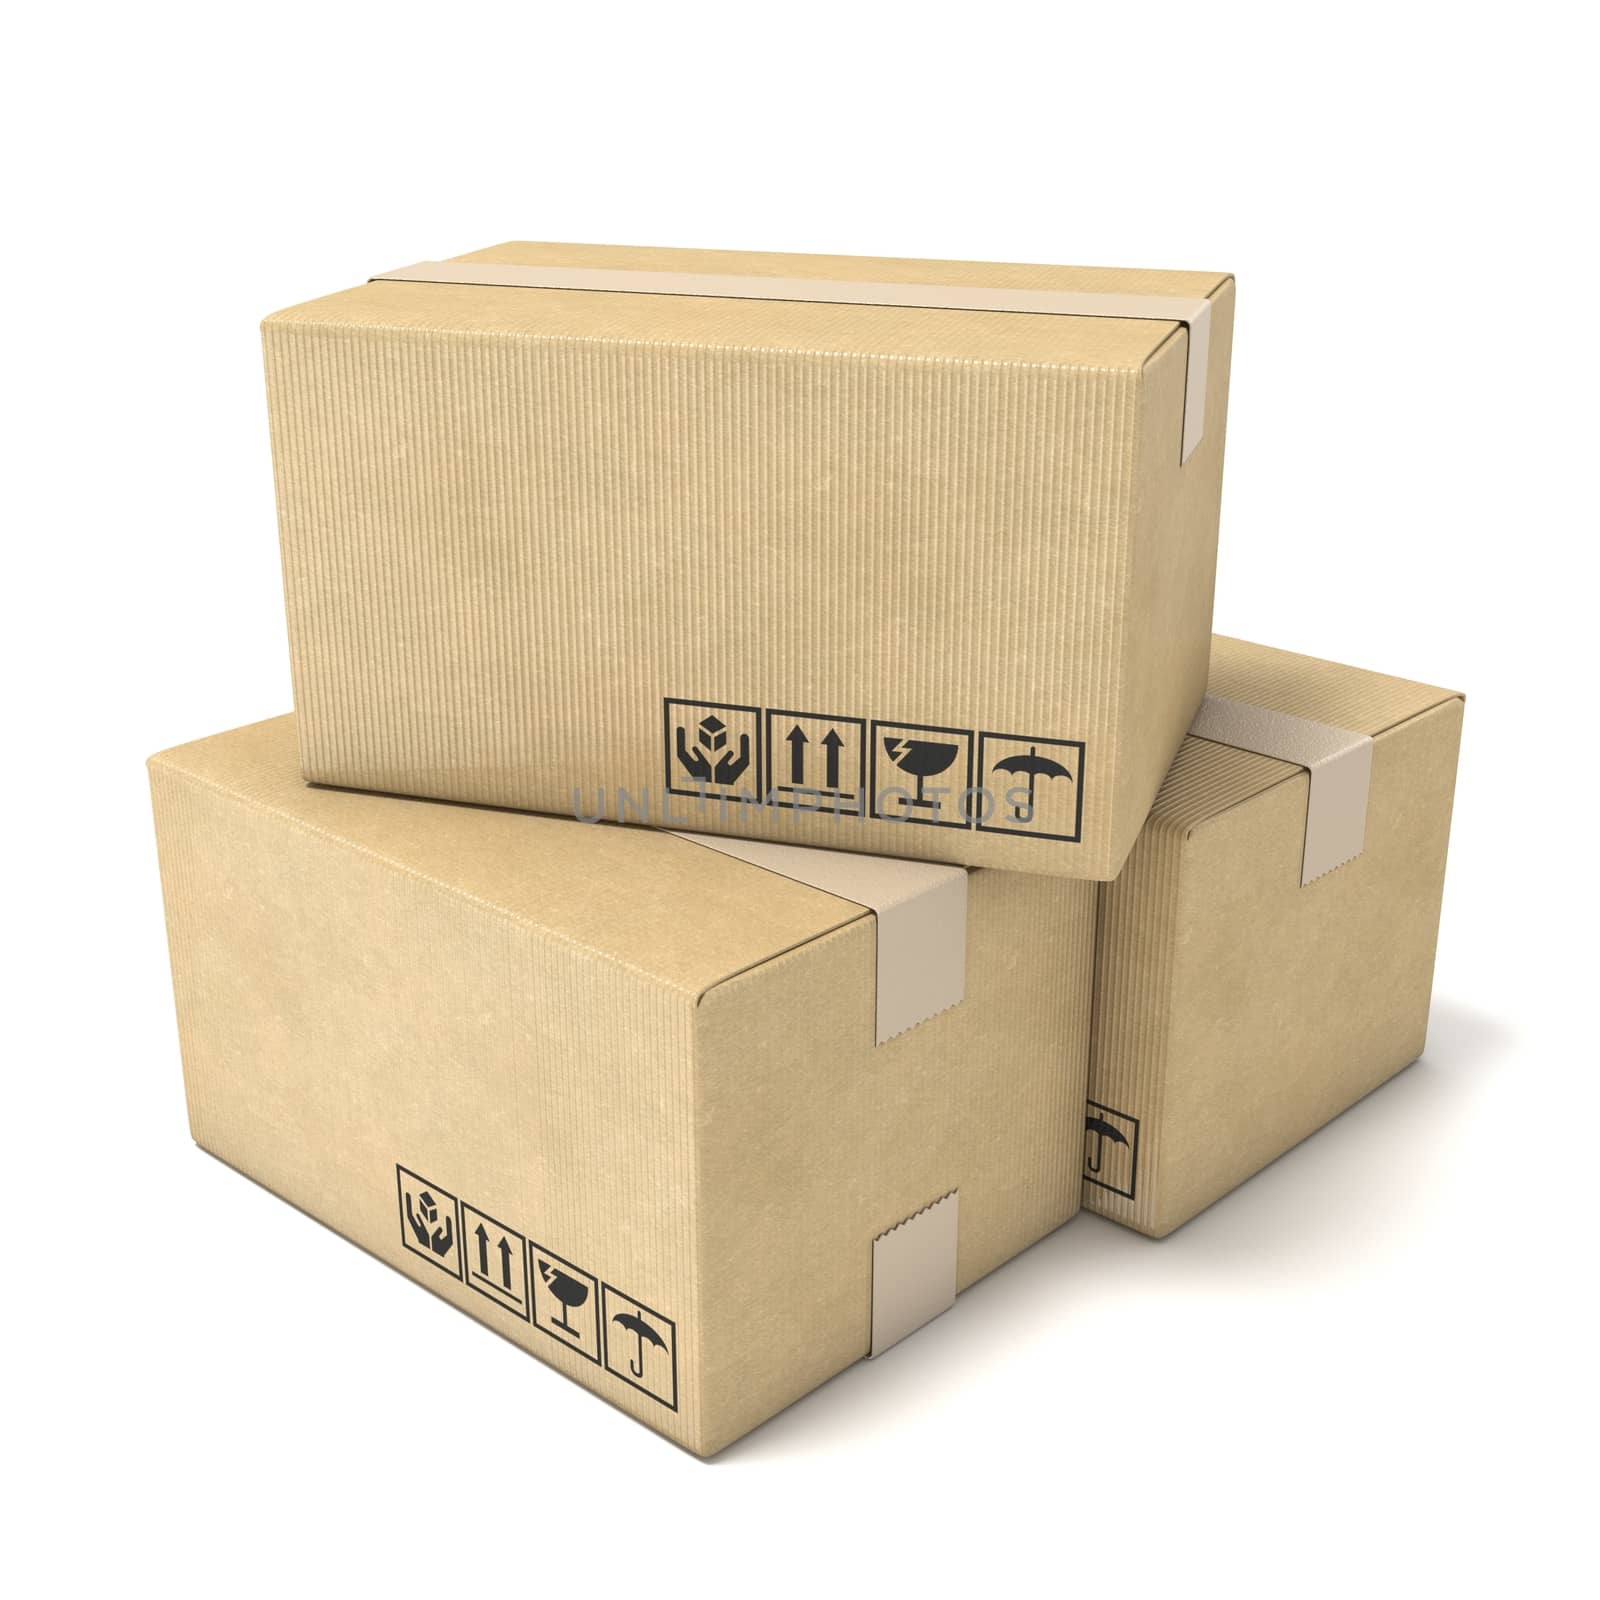 Stack of cardboard boxes. Global packages delivery concept, 3D render illustration isolated on white background